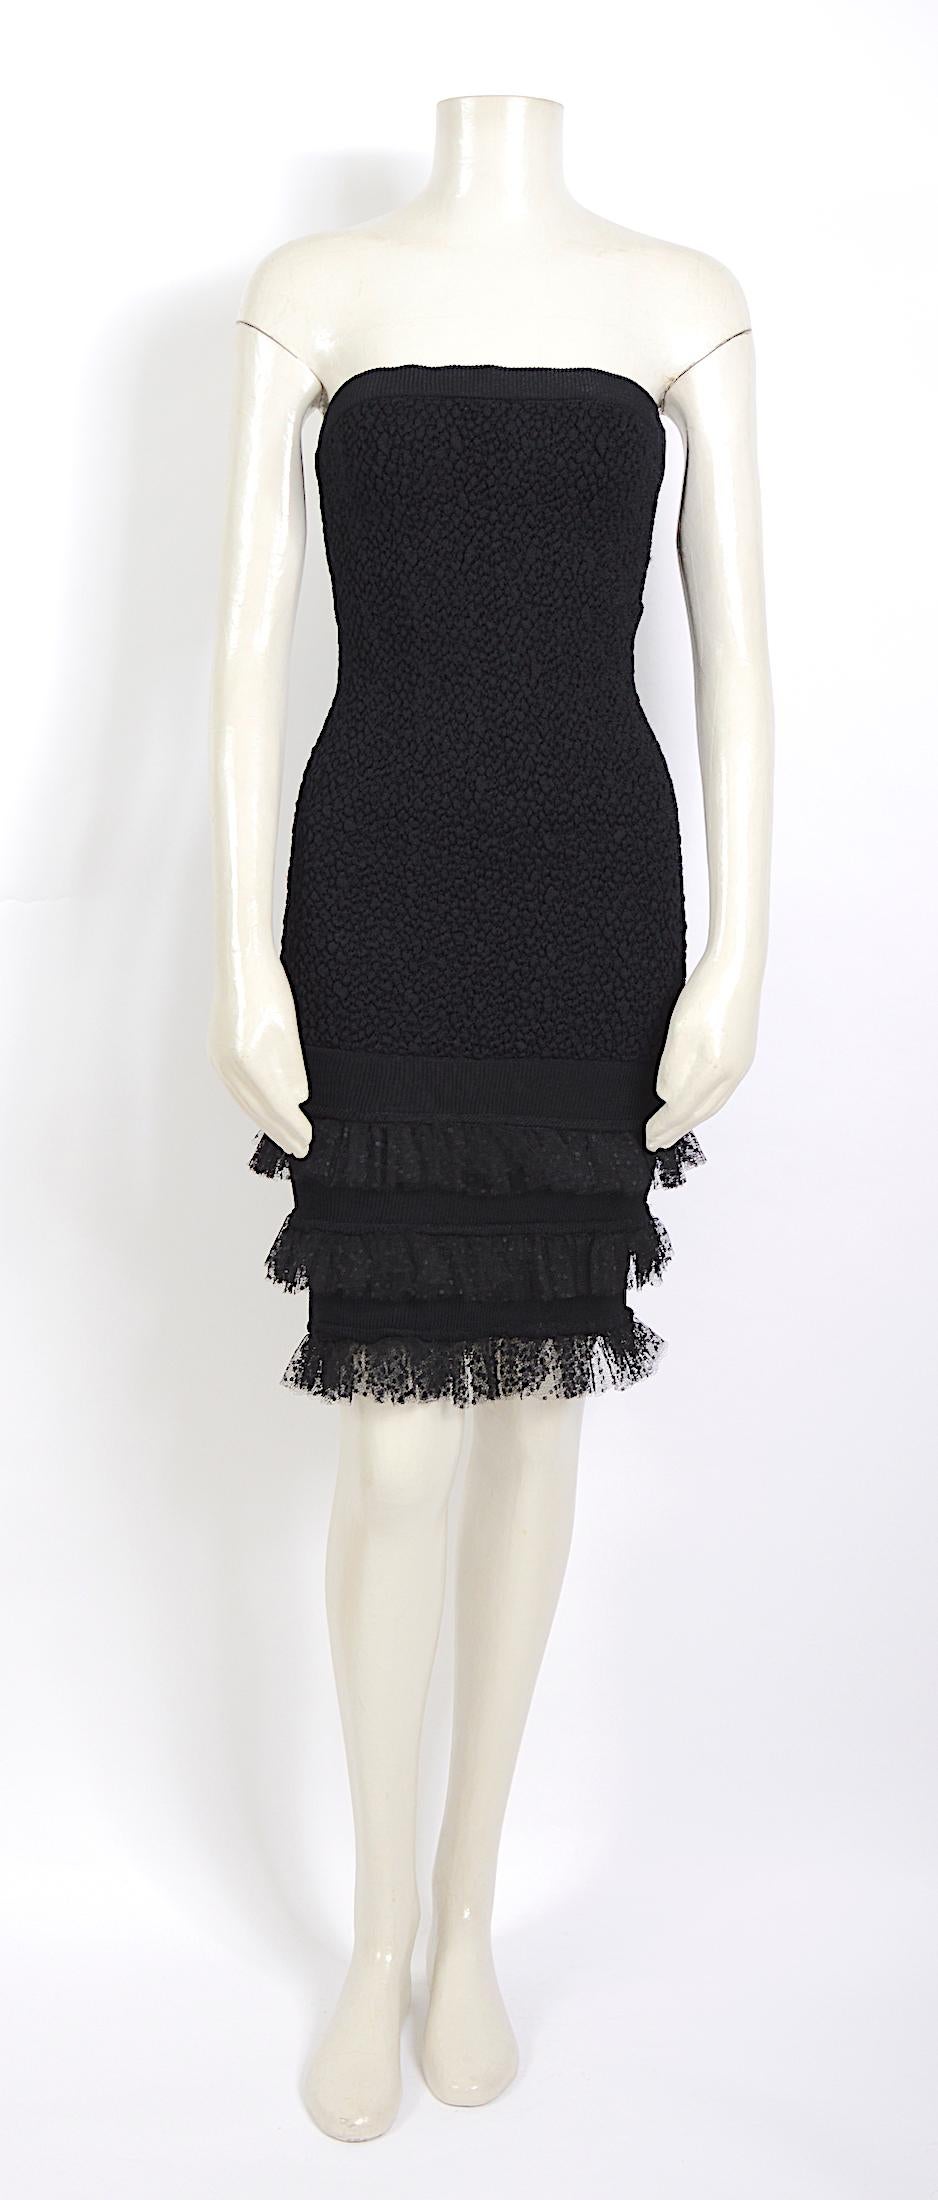 
Yves Saint Laurent's original 1980s version of the tulle trimmed dress available in the Saint Laurent Fall 2019 collection.
The strapless bustier dress comes with a matching bolero.
In good vintage condition. 
Dress and bolero French size 40 but